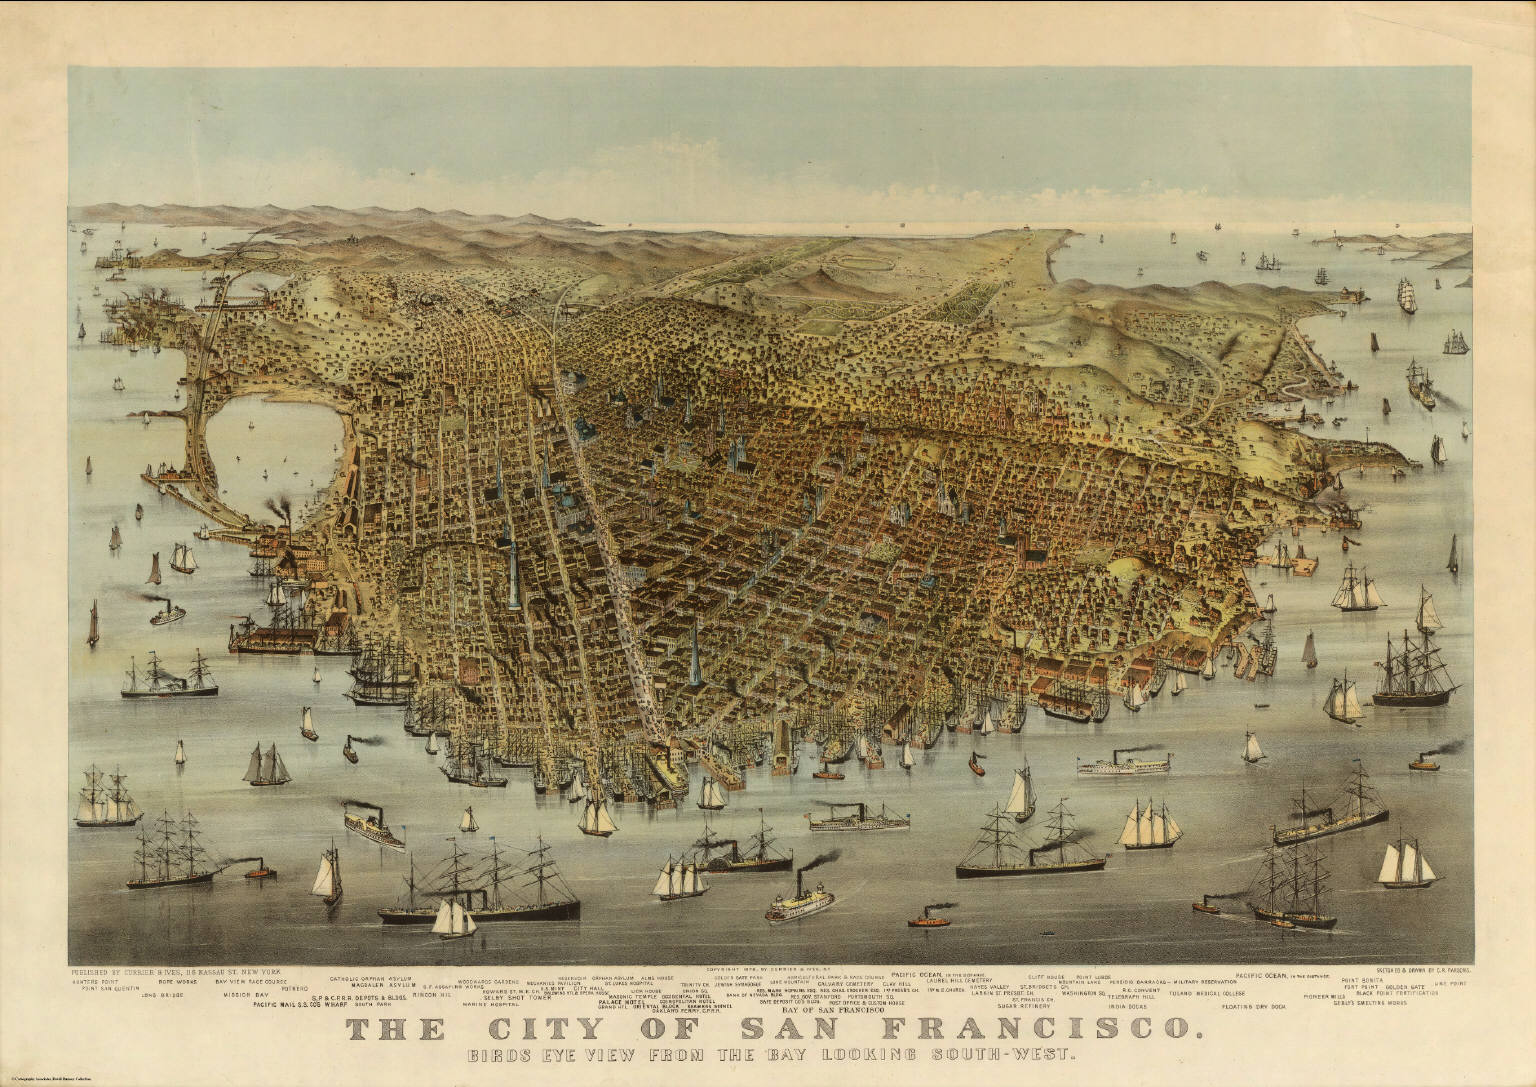 The City of San Francisco: Birds Eye View from the Bay Looking South-West  1878